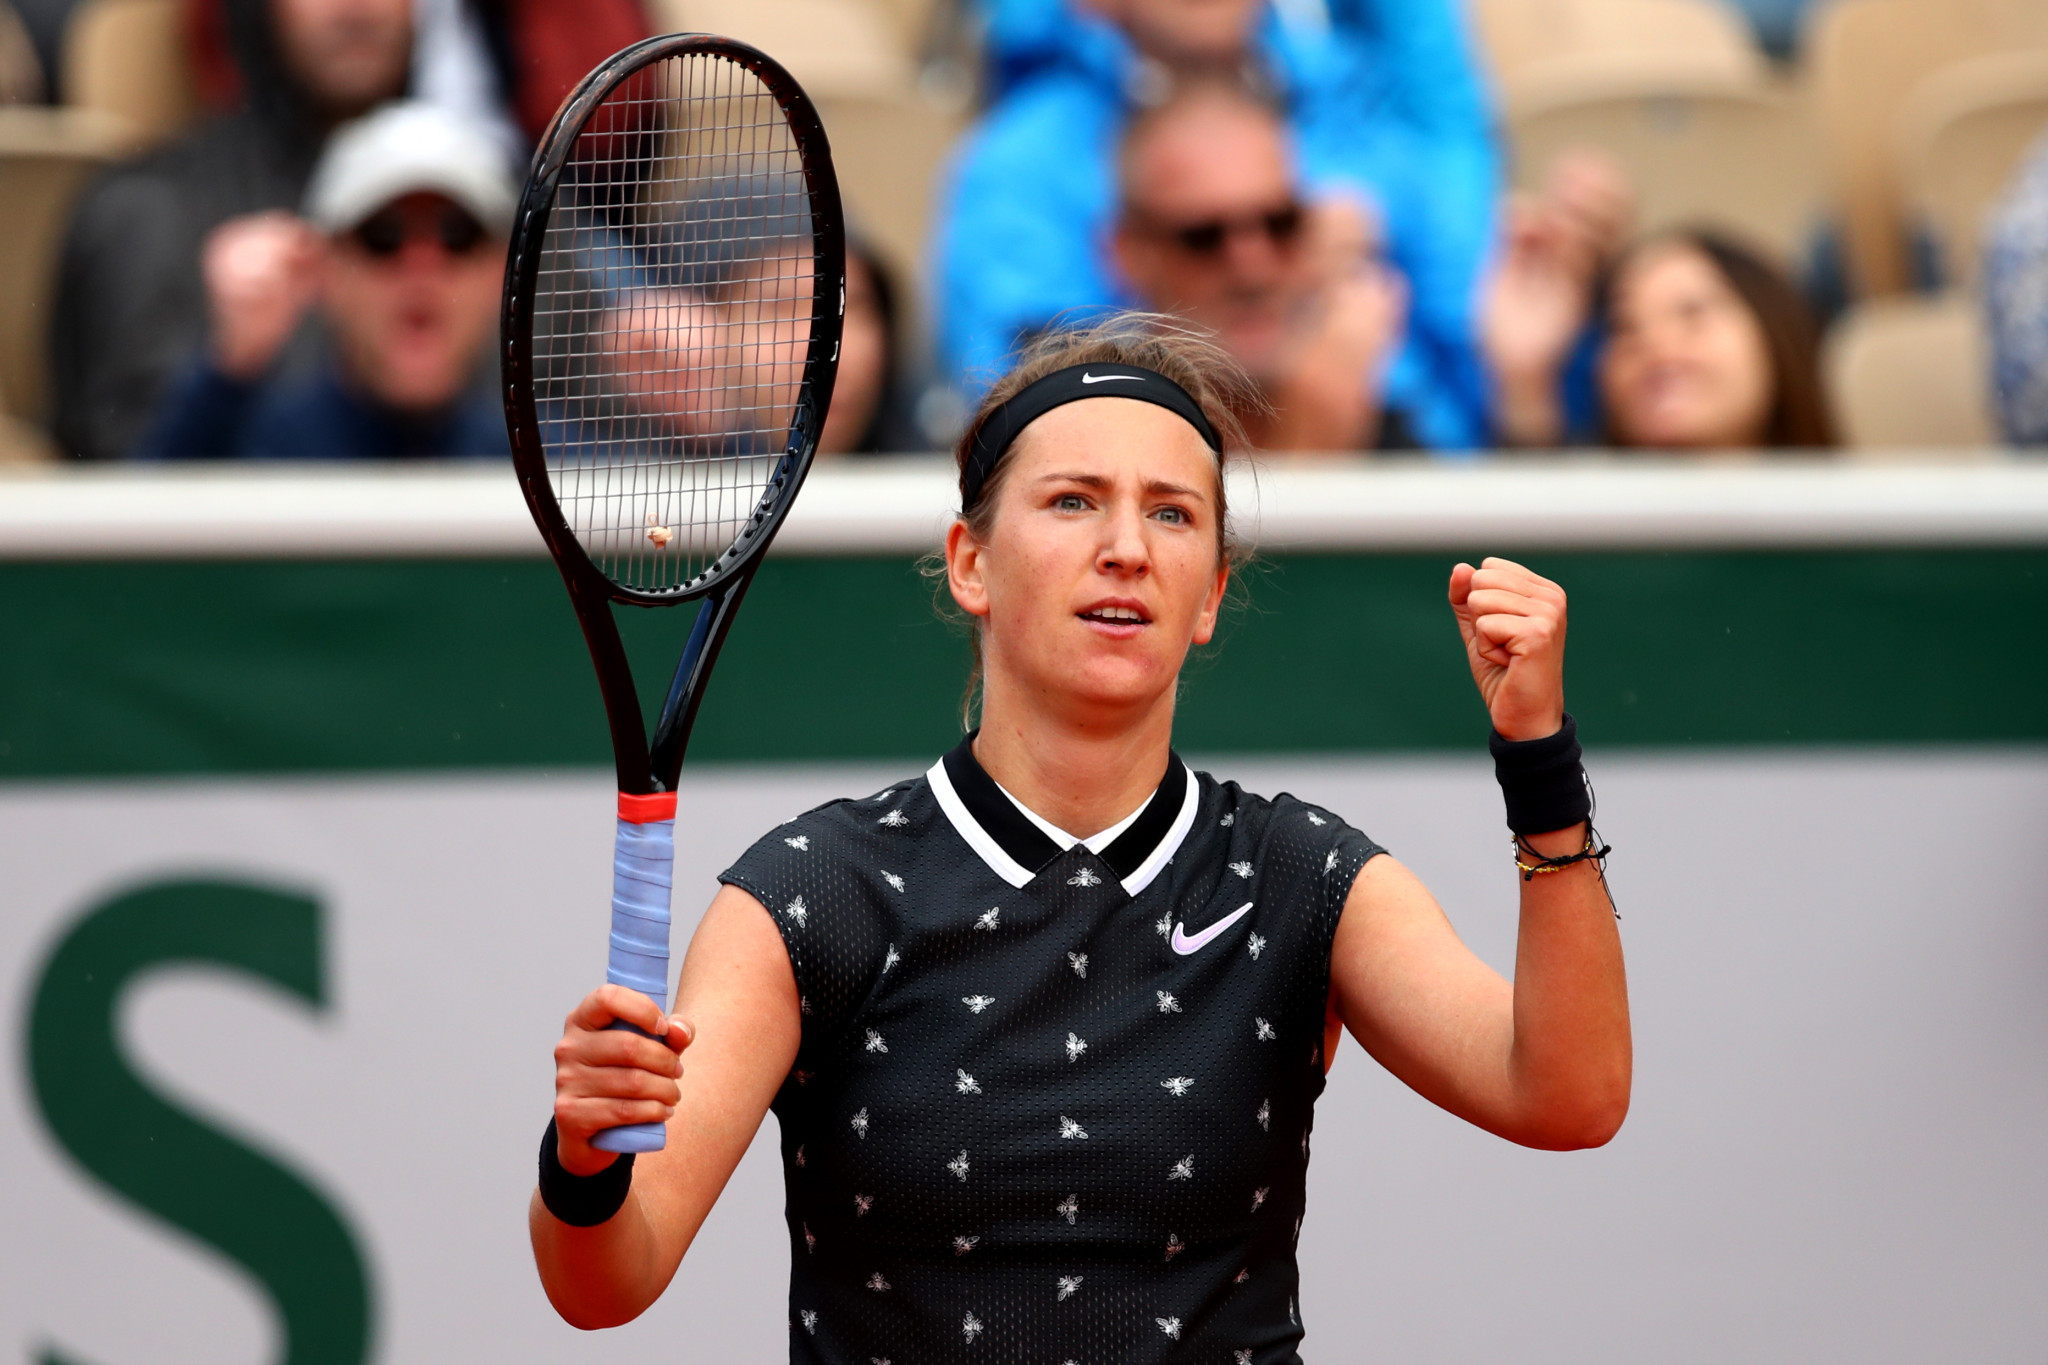 Two-time Australian Open champion Victória Azárenka of Belarus beat former French Open champion Jeļena Ostapenko of Latvia in the women's singles draw ©Getty Images